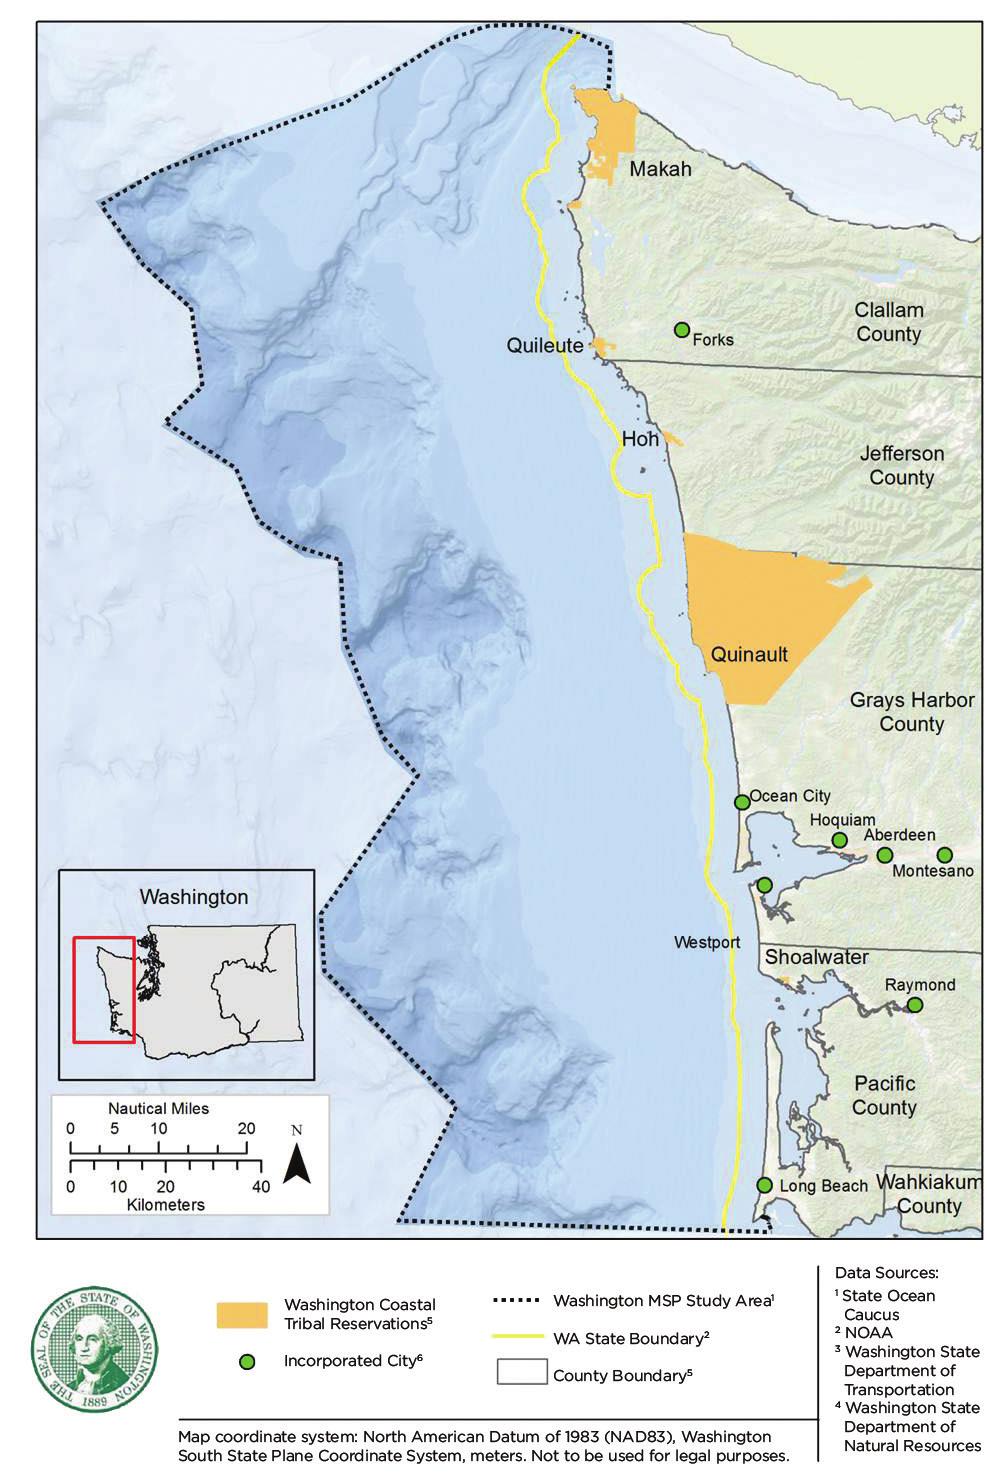 In 2002 and 2007, proposals for renewable energy facilities off the Washington Pacific coast became the driver for implementing marine spatial planning (MSP) for these waters.